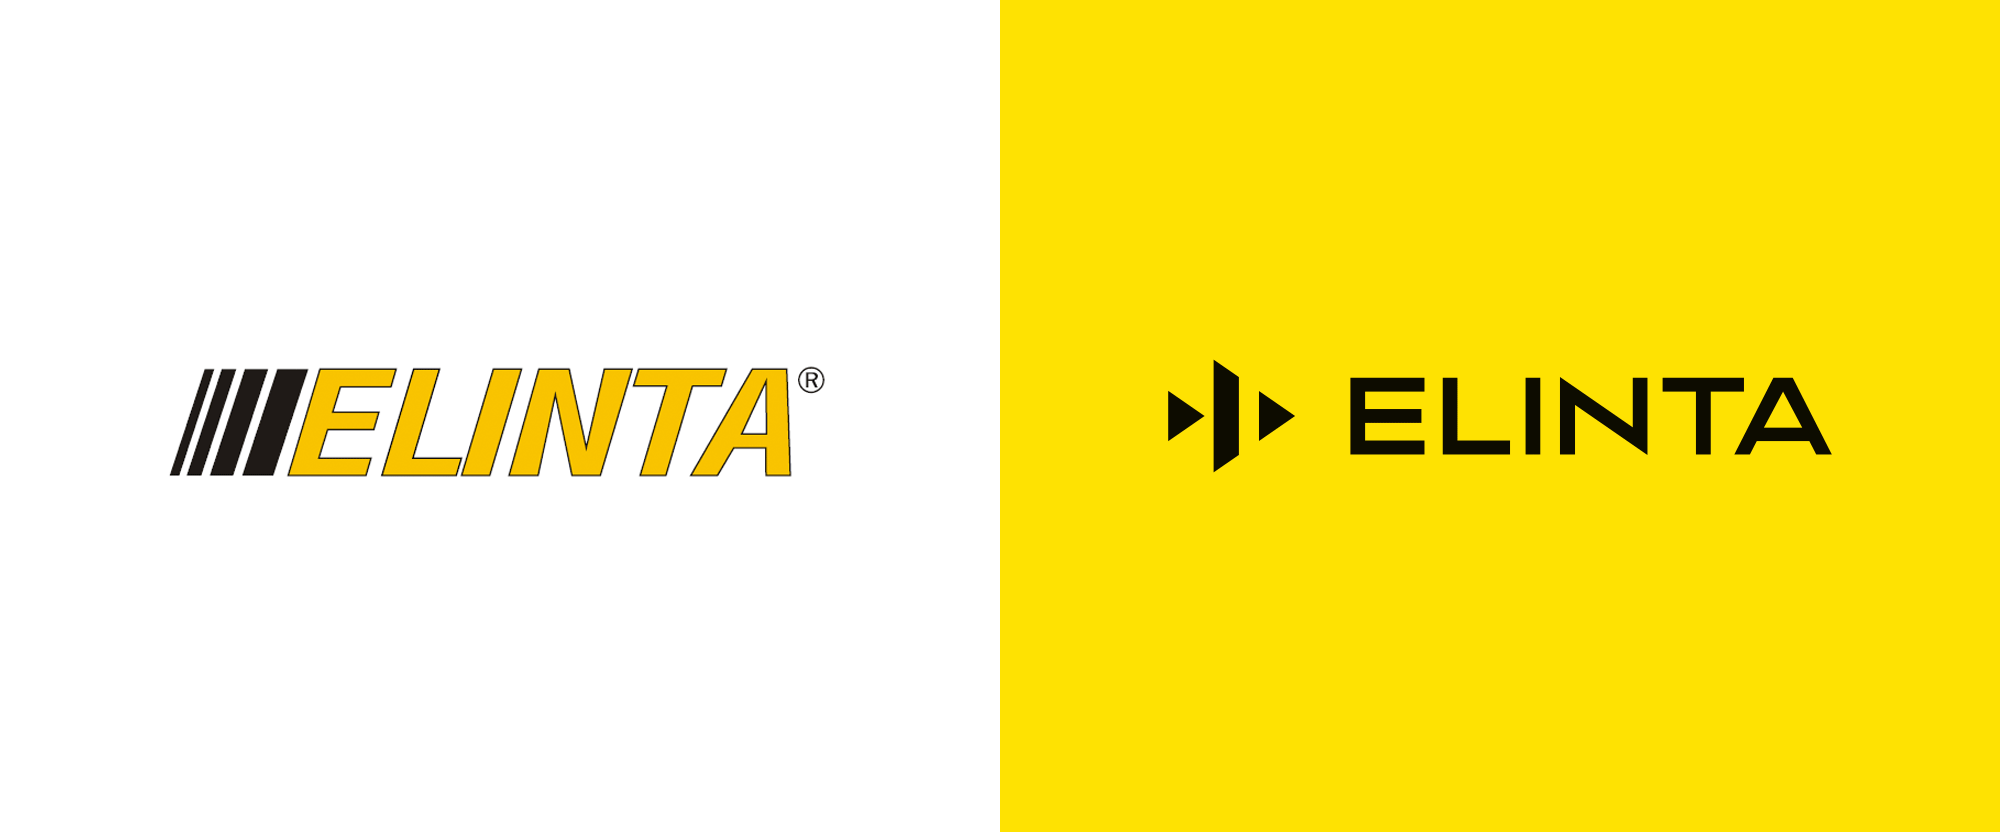 New Logo and Identity for Elinta by Rebrand